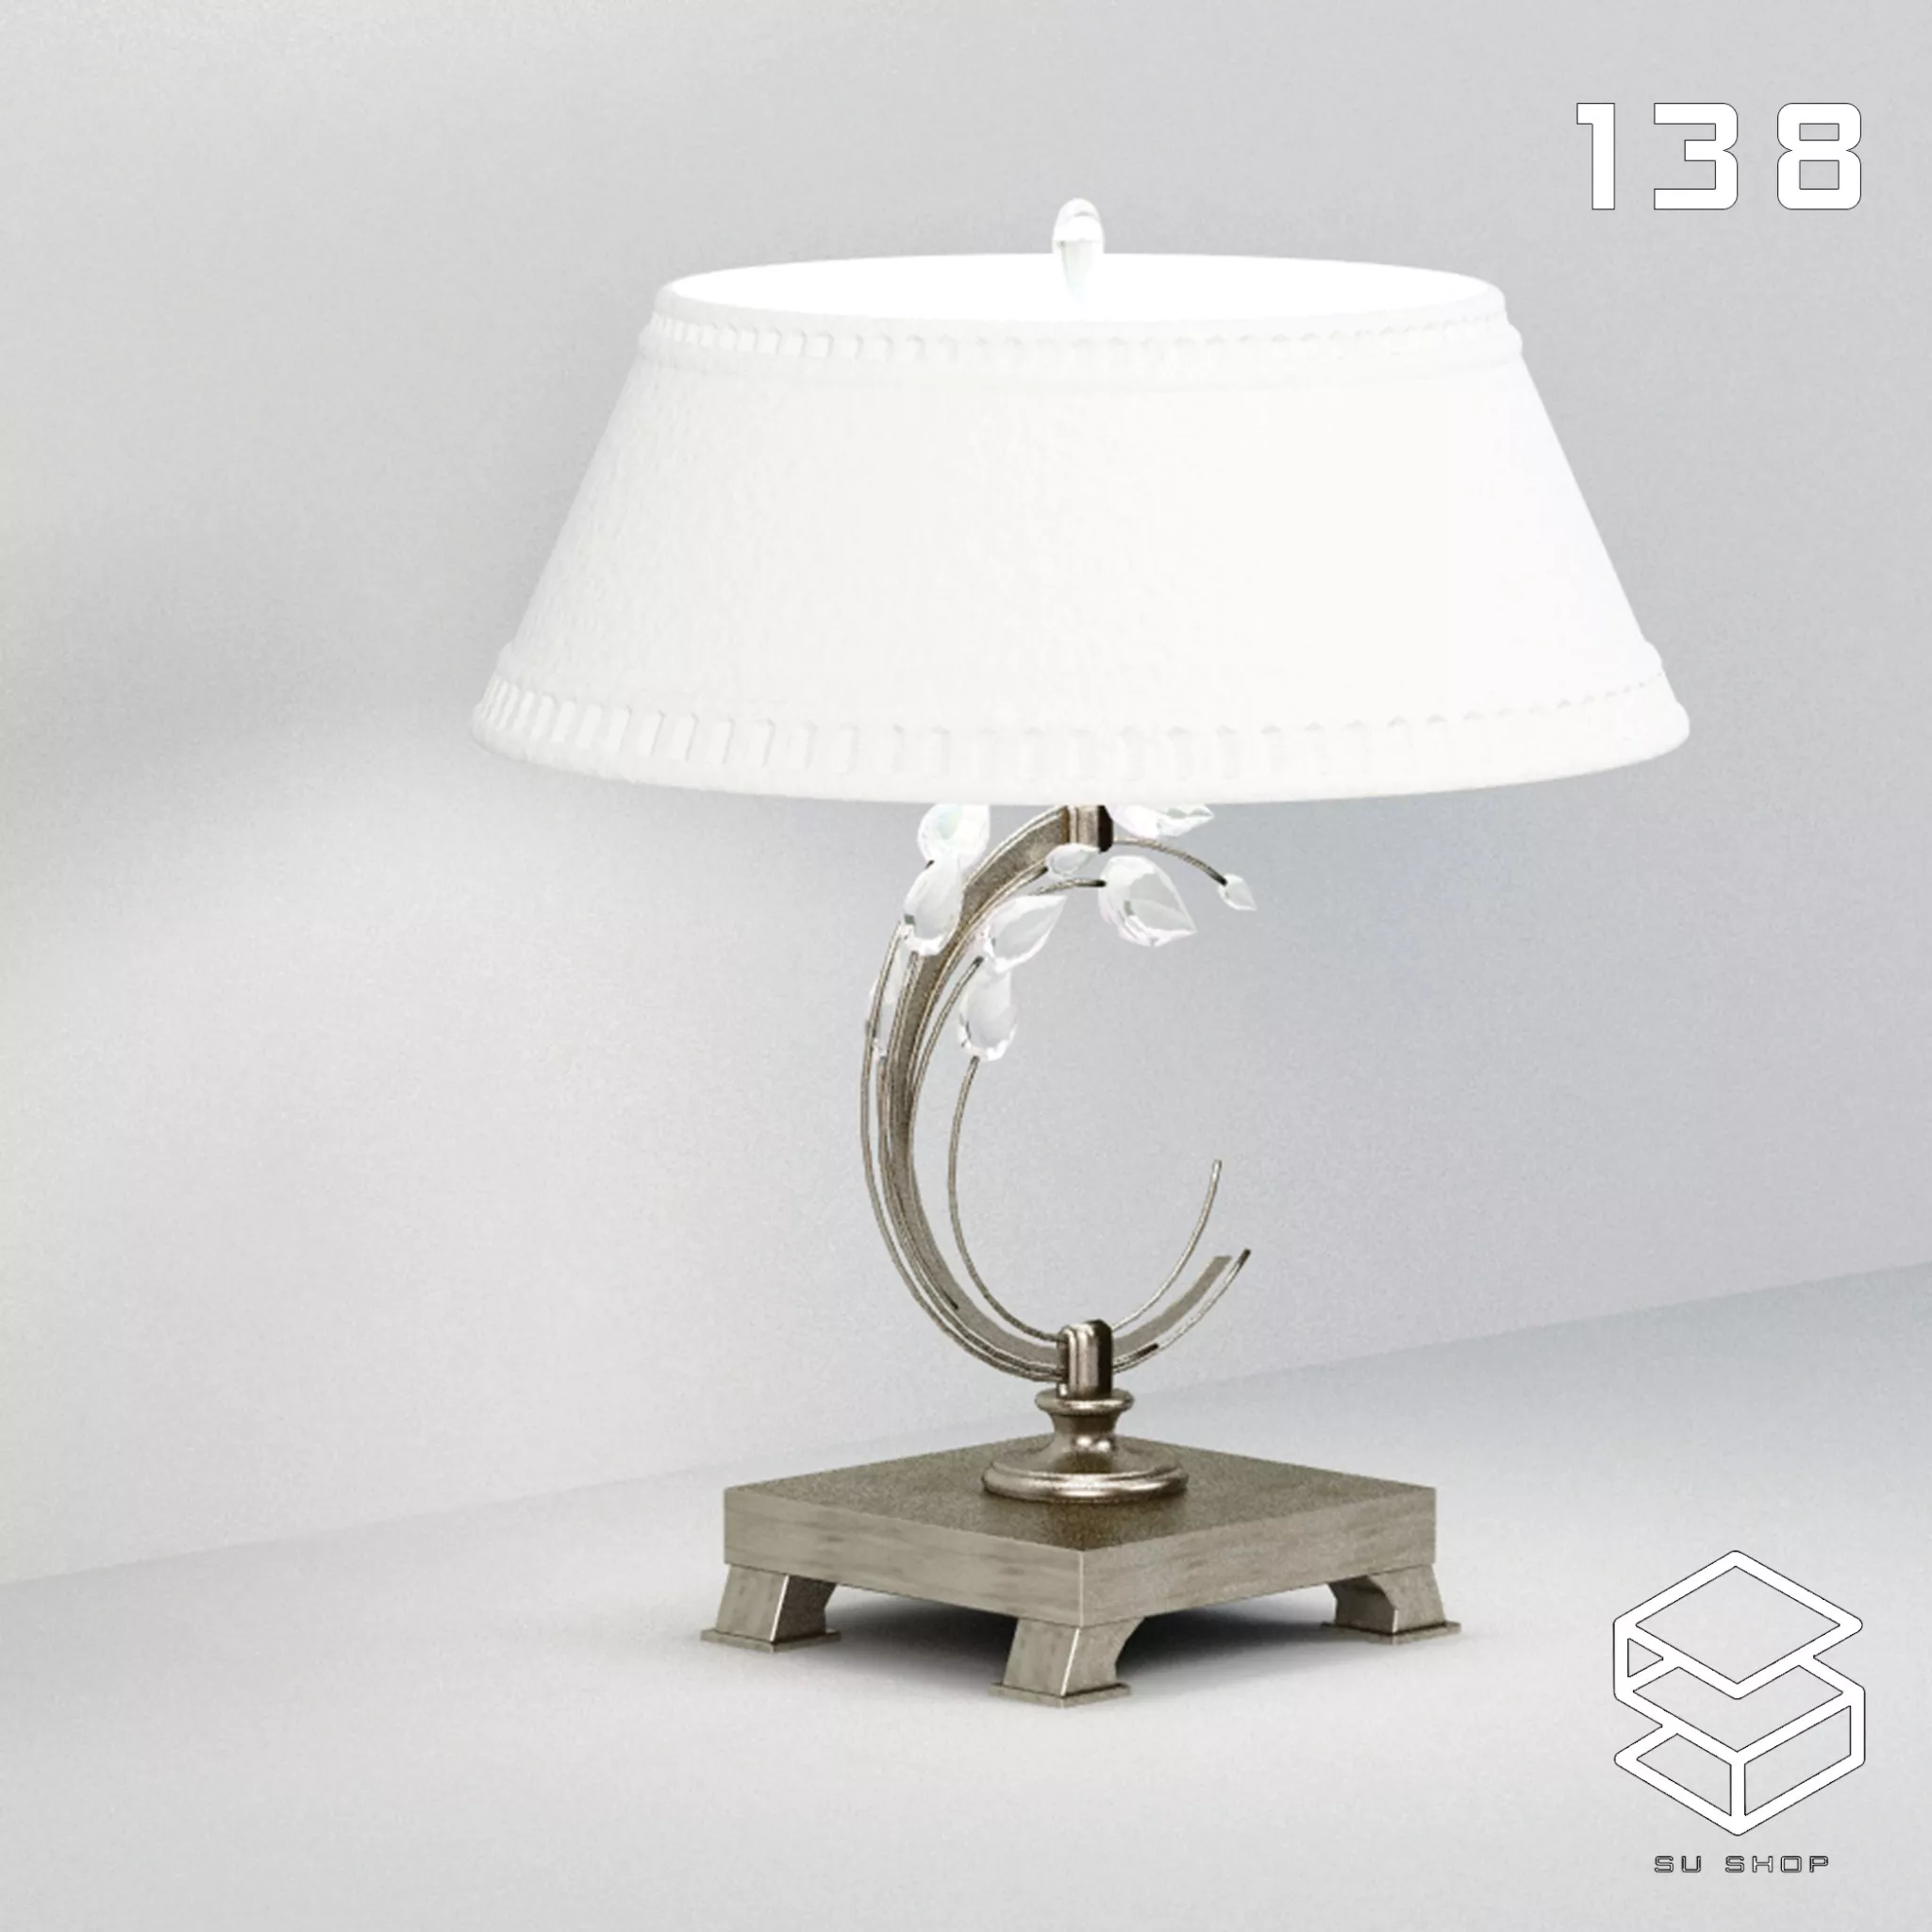 MODERN TABLE LAMP - SKETCHUP 3D MODEL - VRAY OR ENSCAPE - ID14706